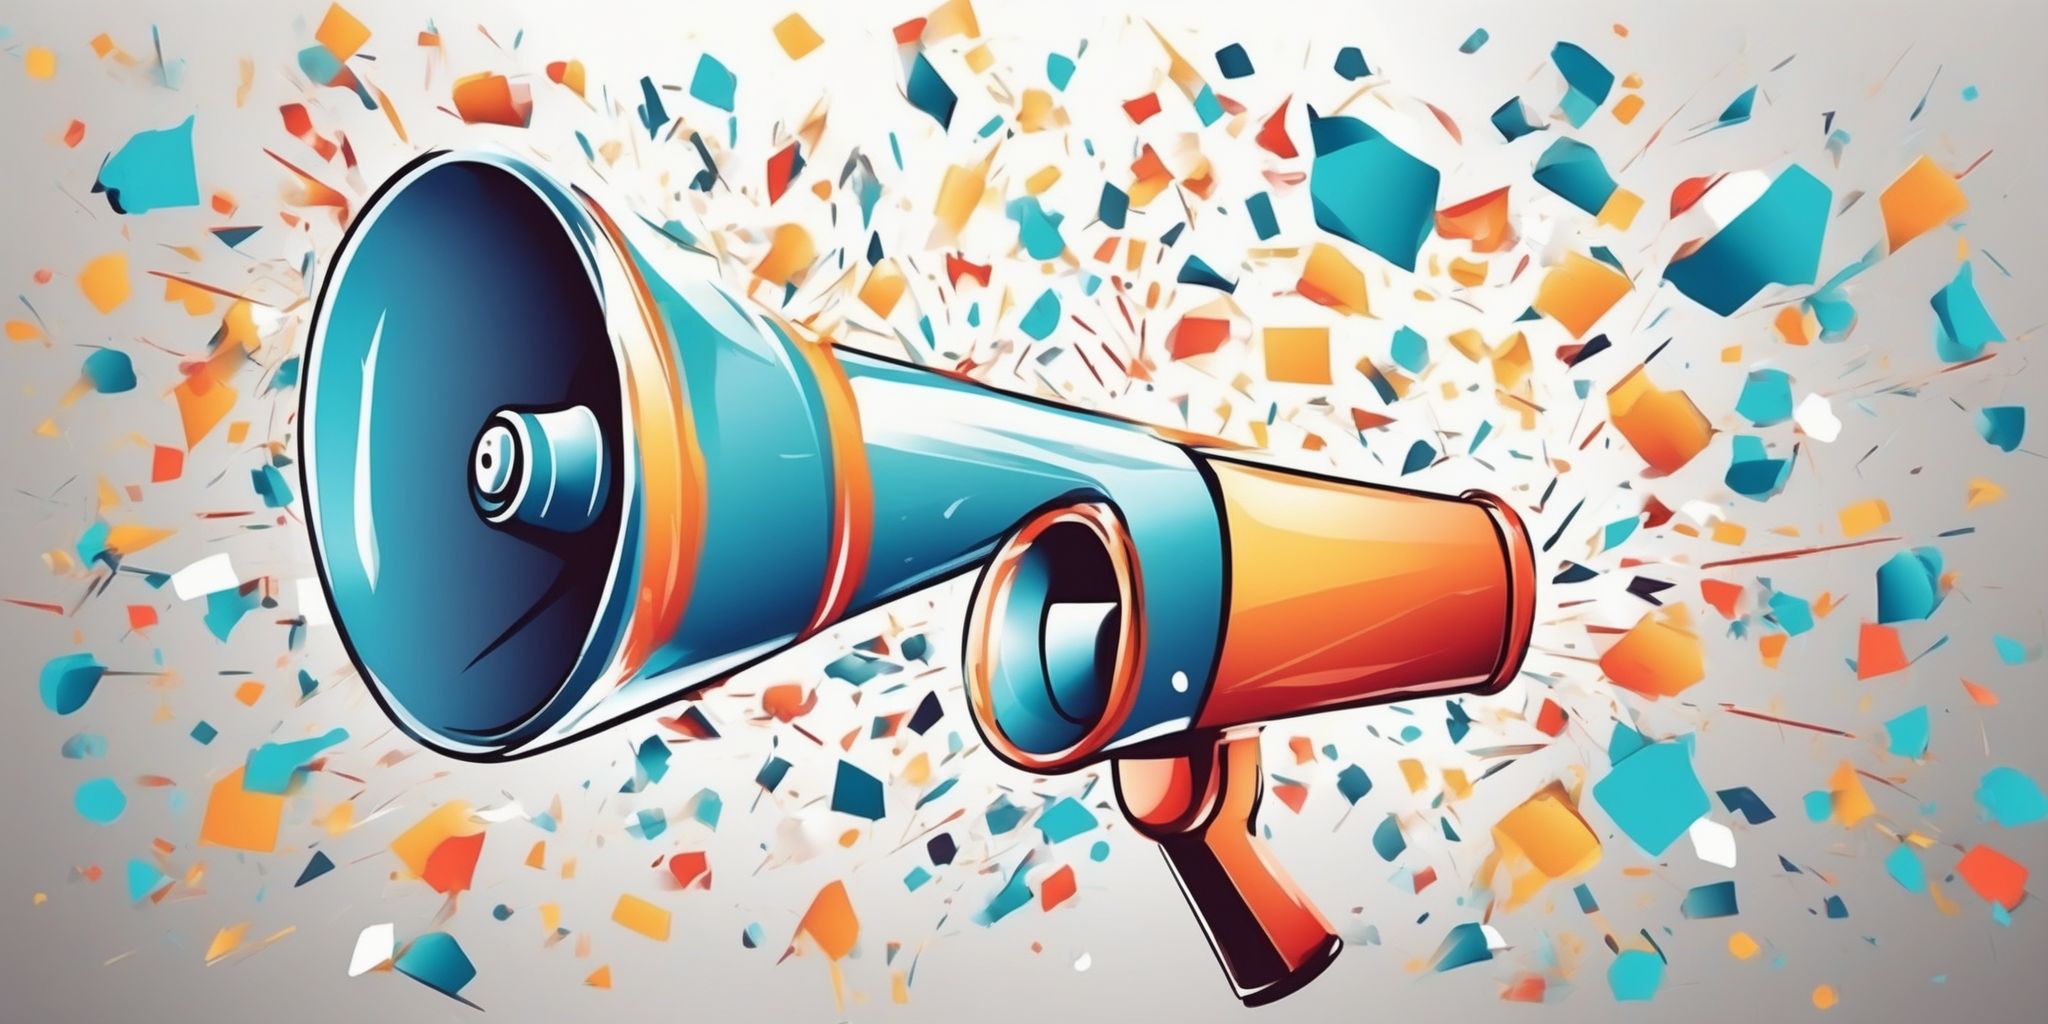 megaphone in illustration style with gradients and white background